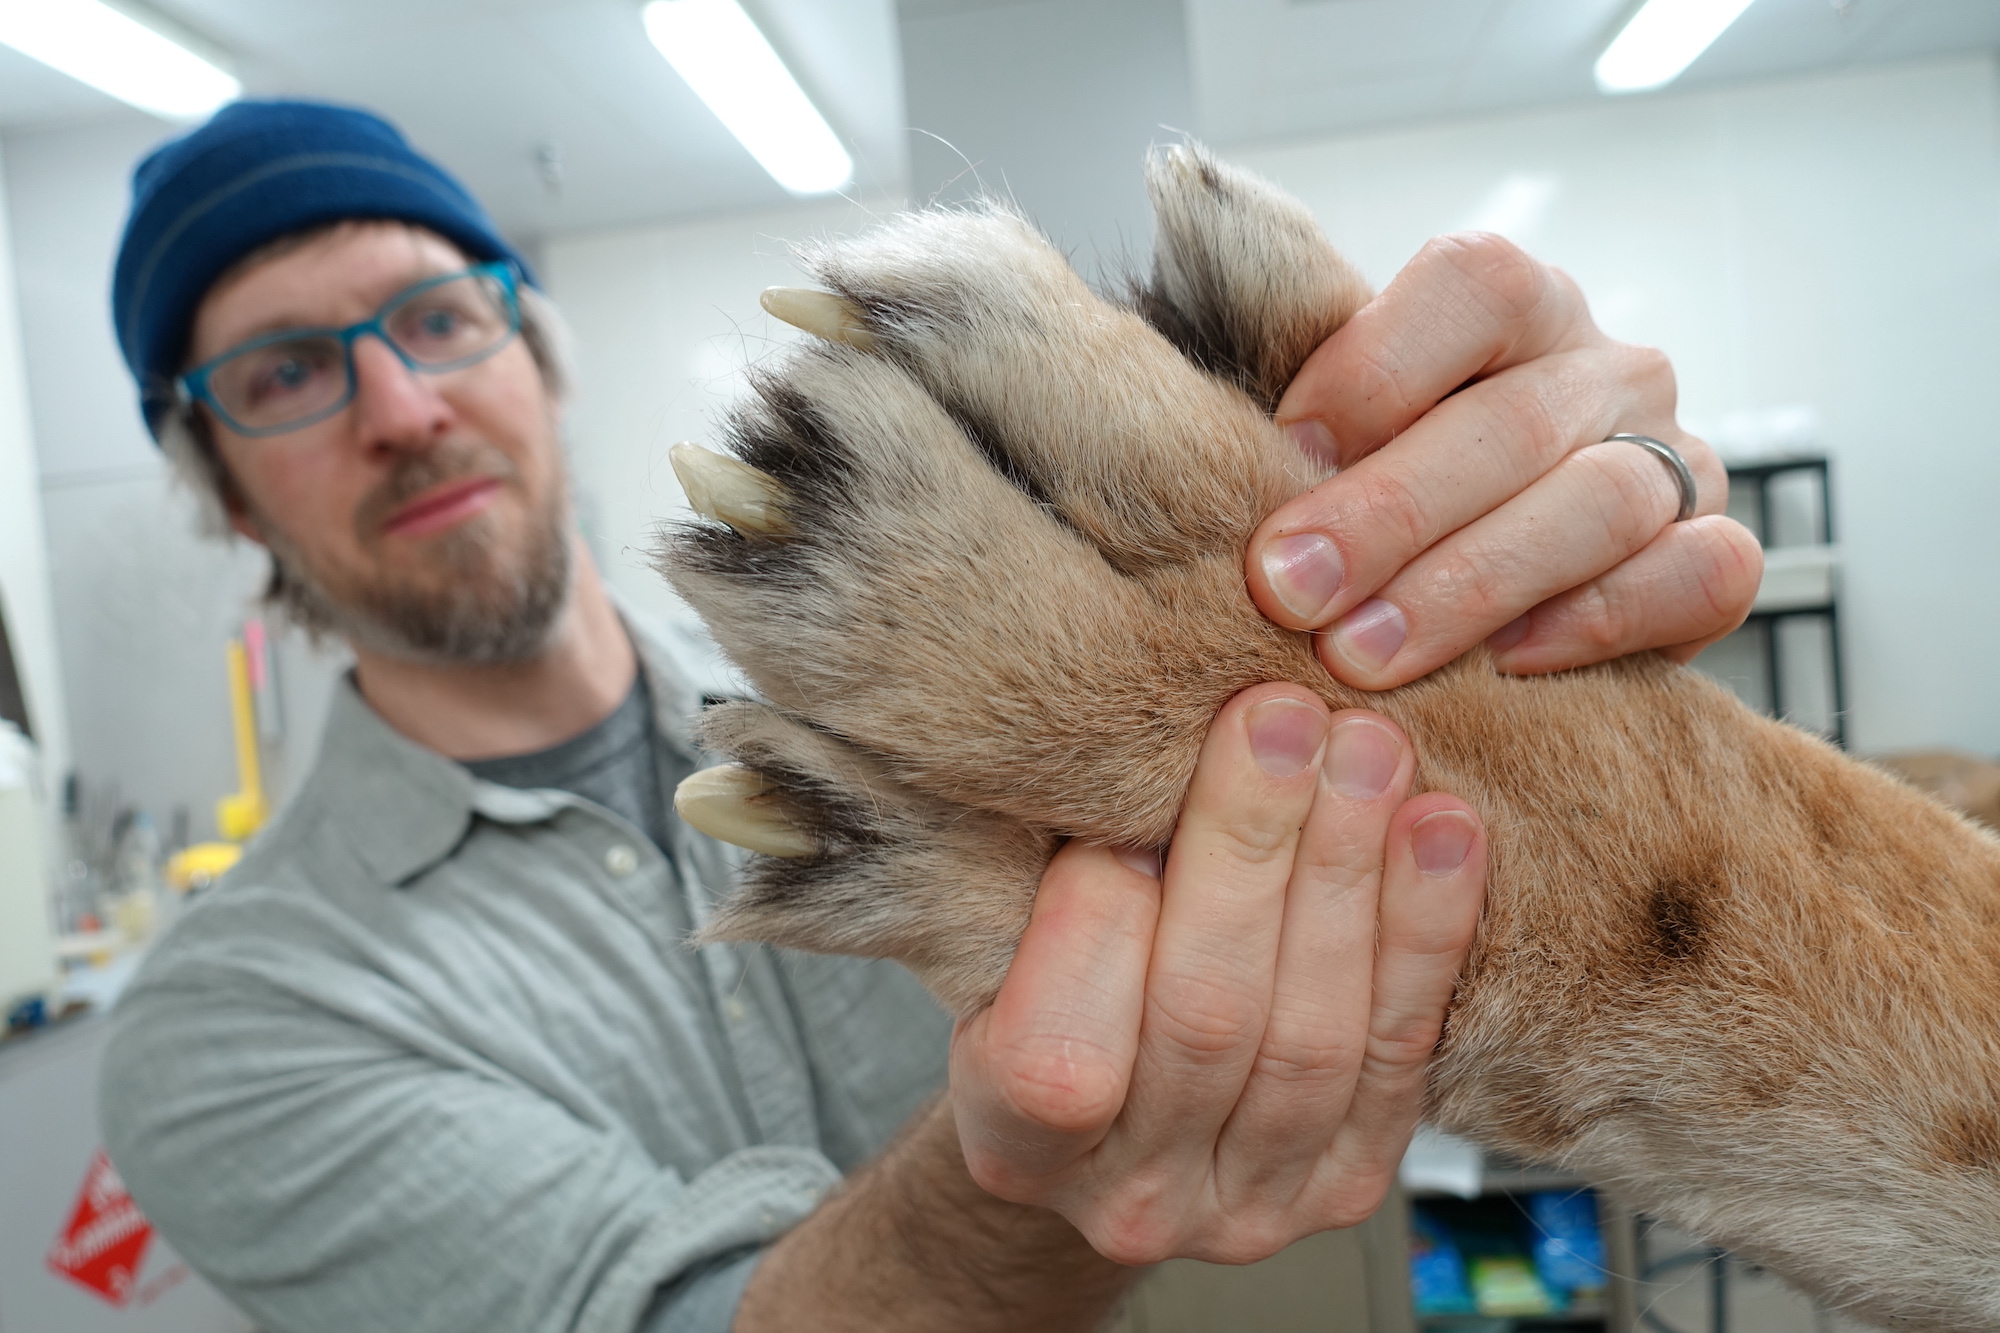 Using both hands, a bearded man in glasses and a knit blue cap holds a tiger paw close to the camera. The paw has large white claws.